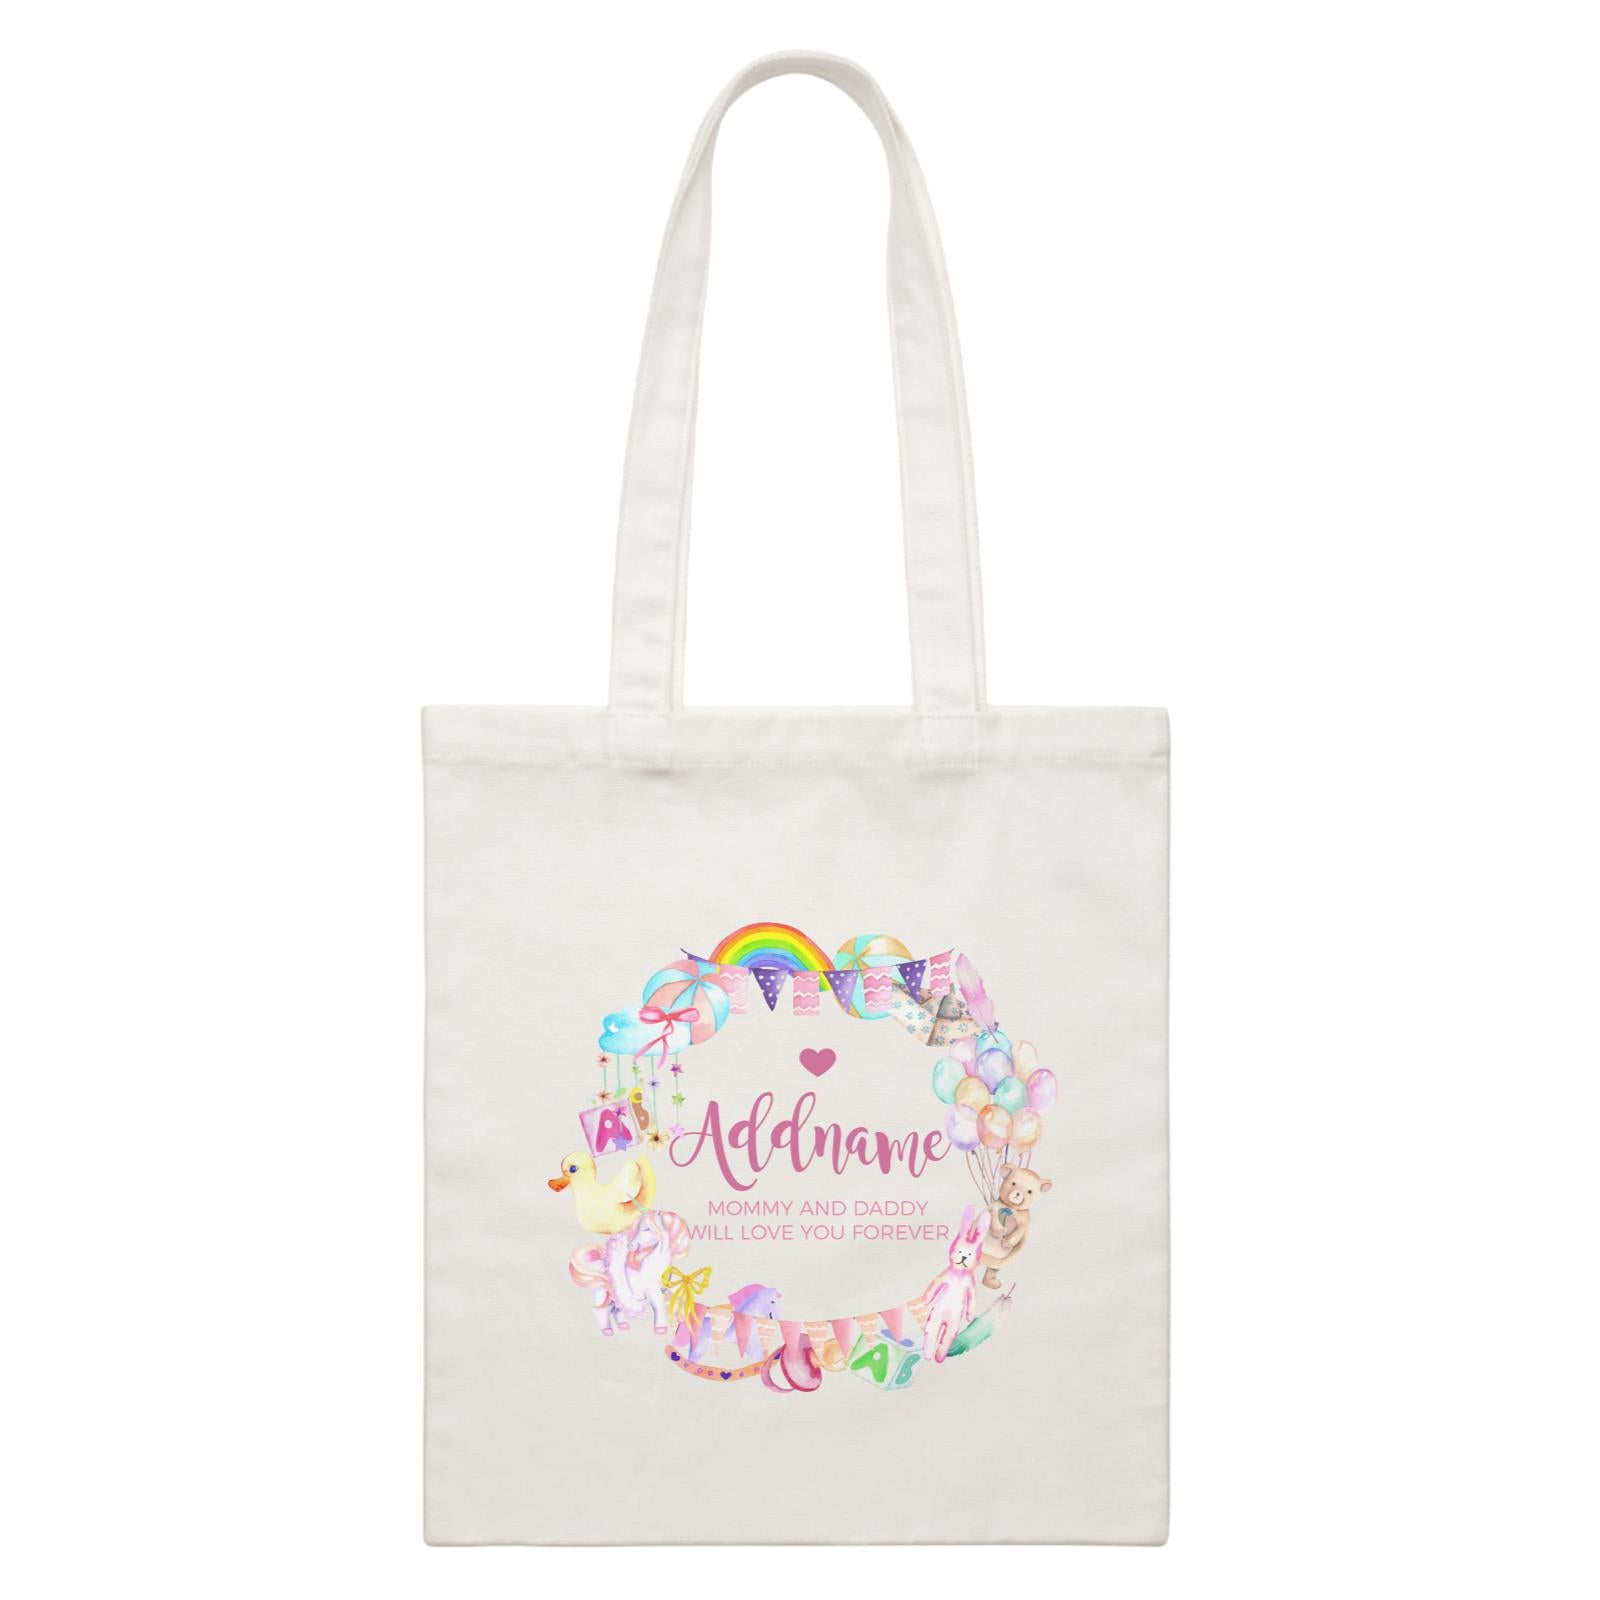 Watercolour Magical Girlish Creatures and Elements Personalizable with Name and Text White Canvas Bag